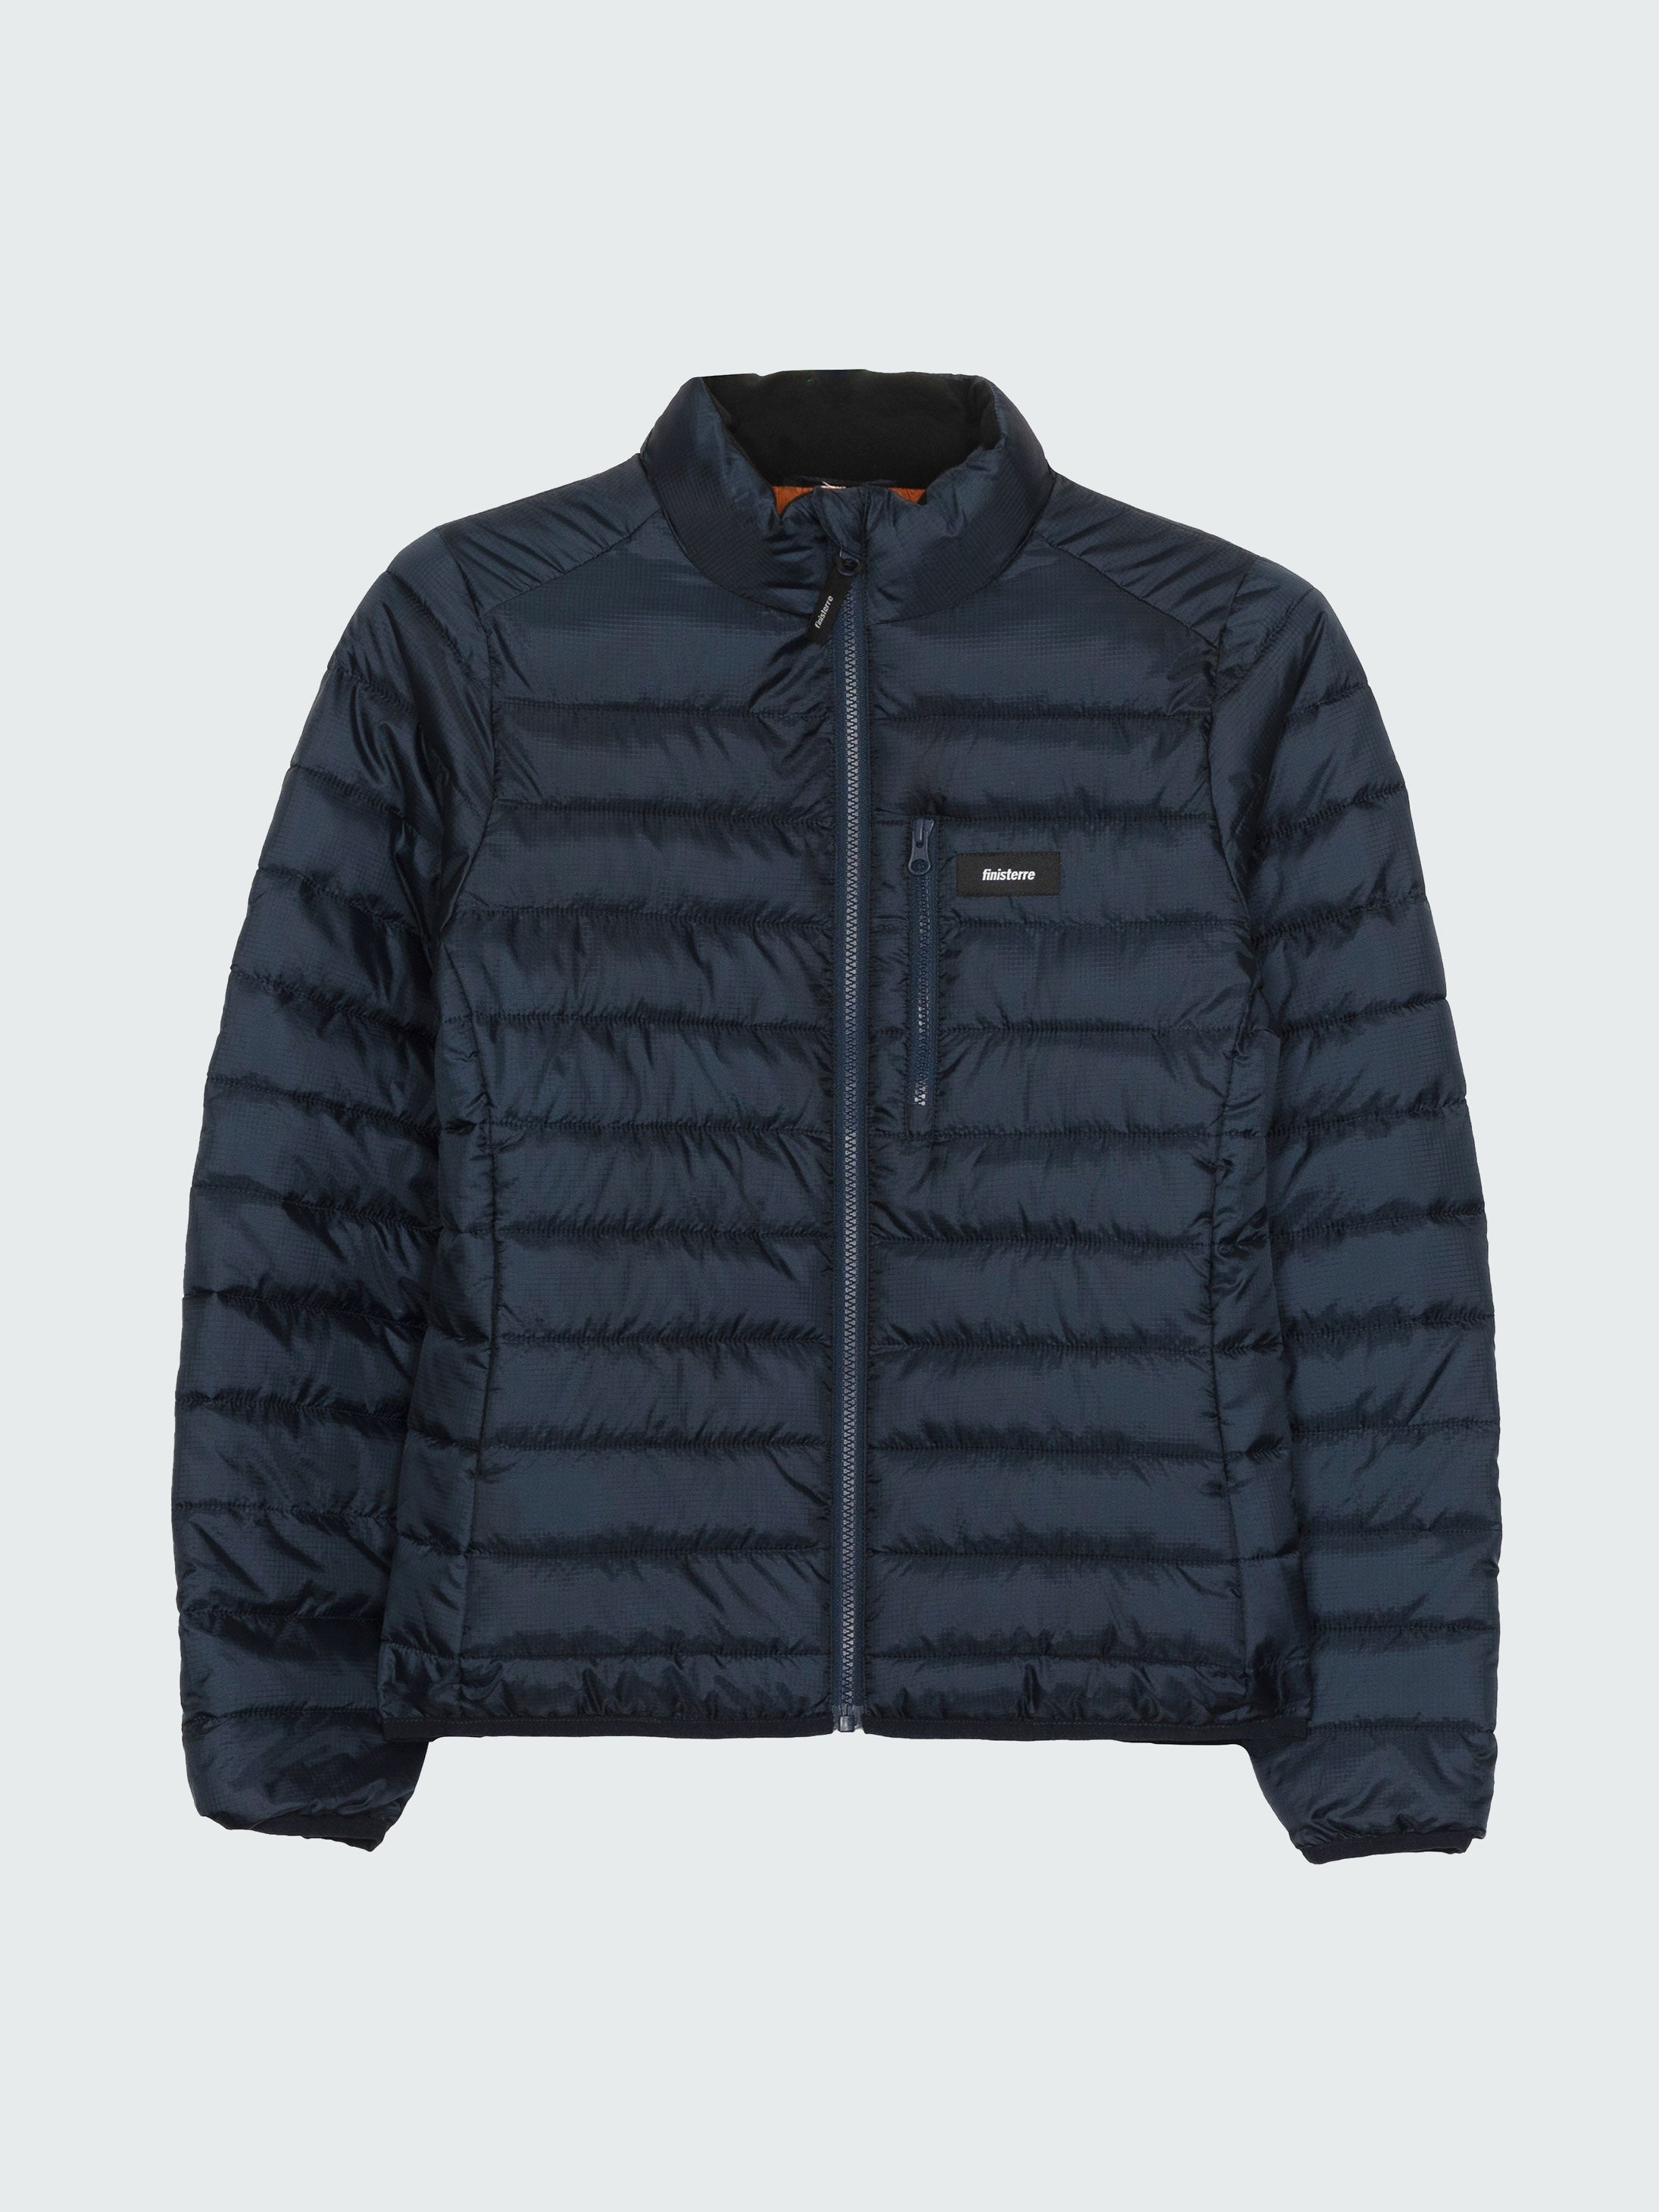 Insulated Jacket (Navy) | Women's Insulated Jacket | Finisterre